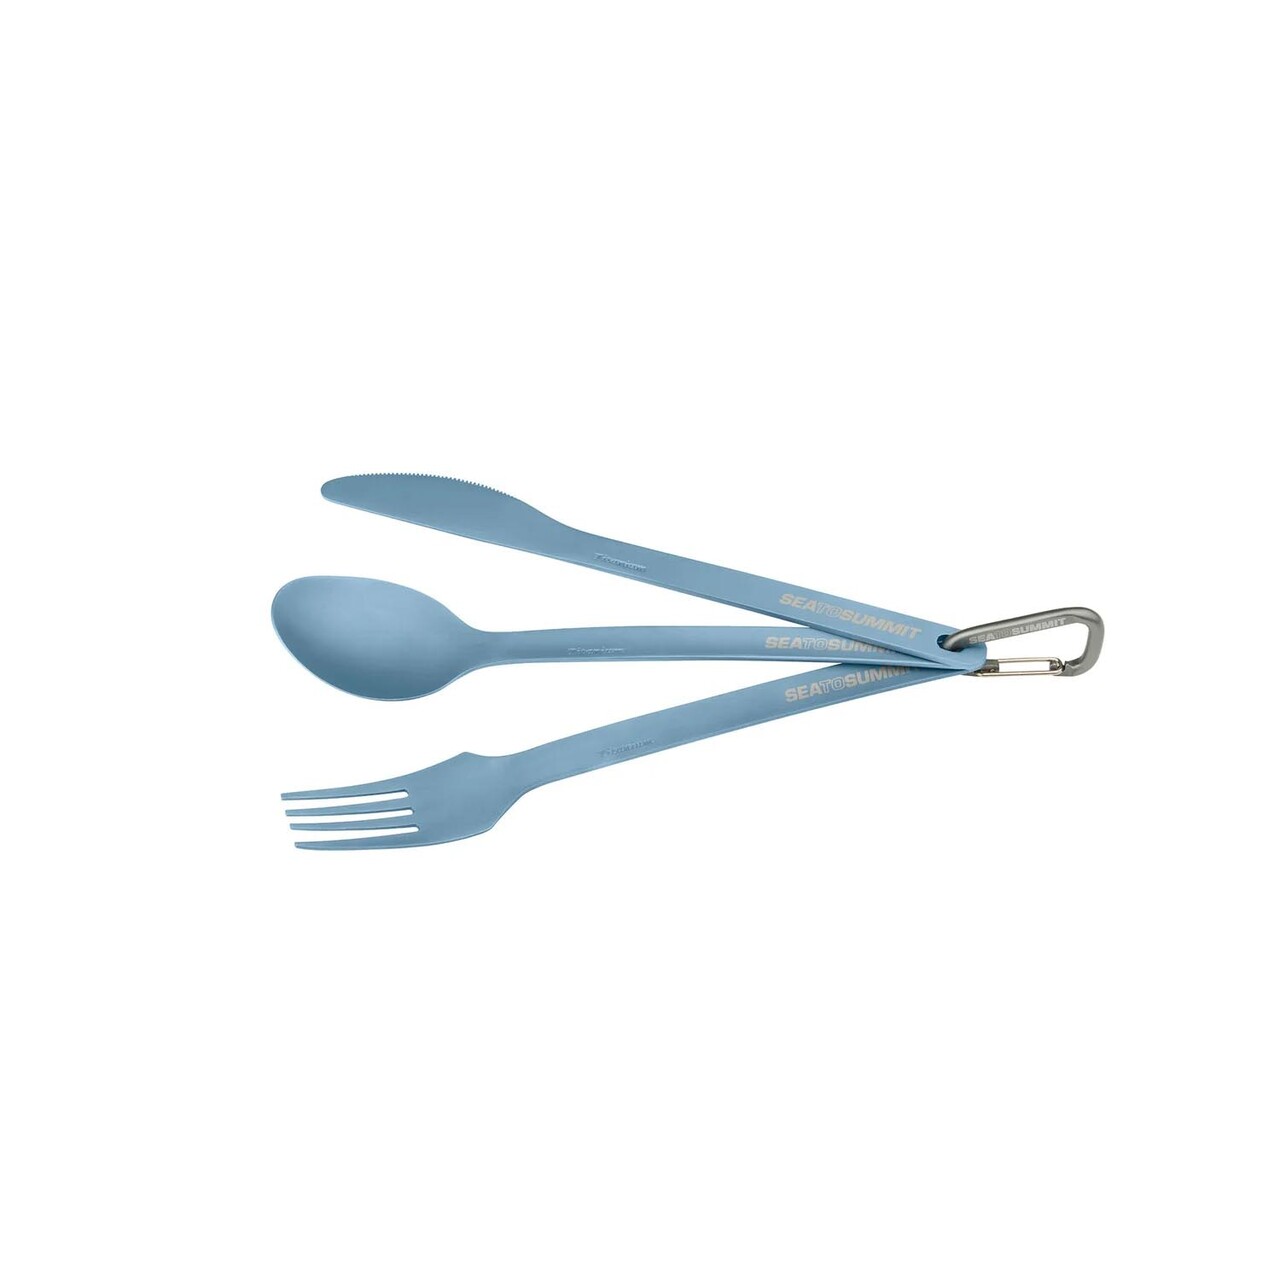 Titanium Cutlery Set 3pc (Knife, Fork and Spoon)